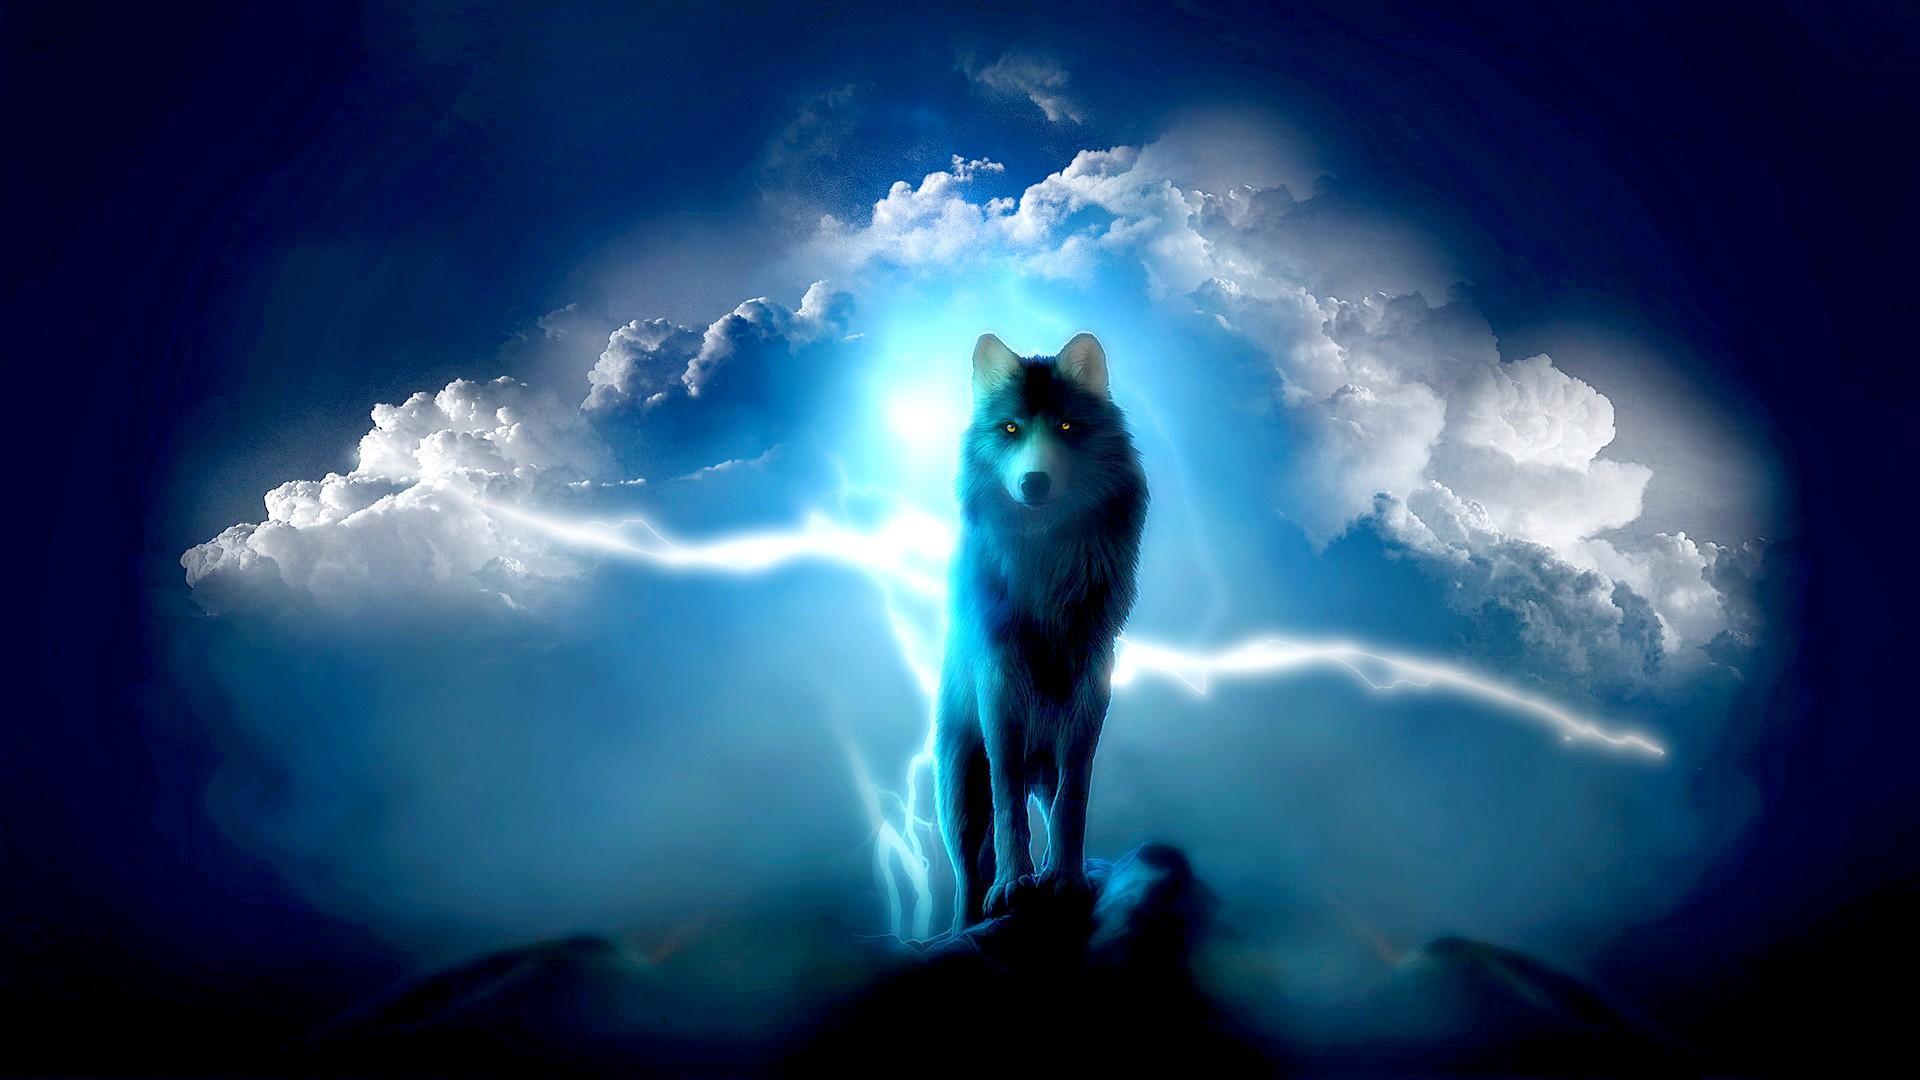 Wolf Wallpaper , Find HD Wallpaper For Free